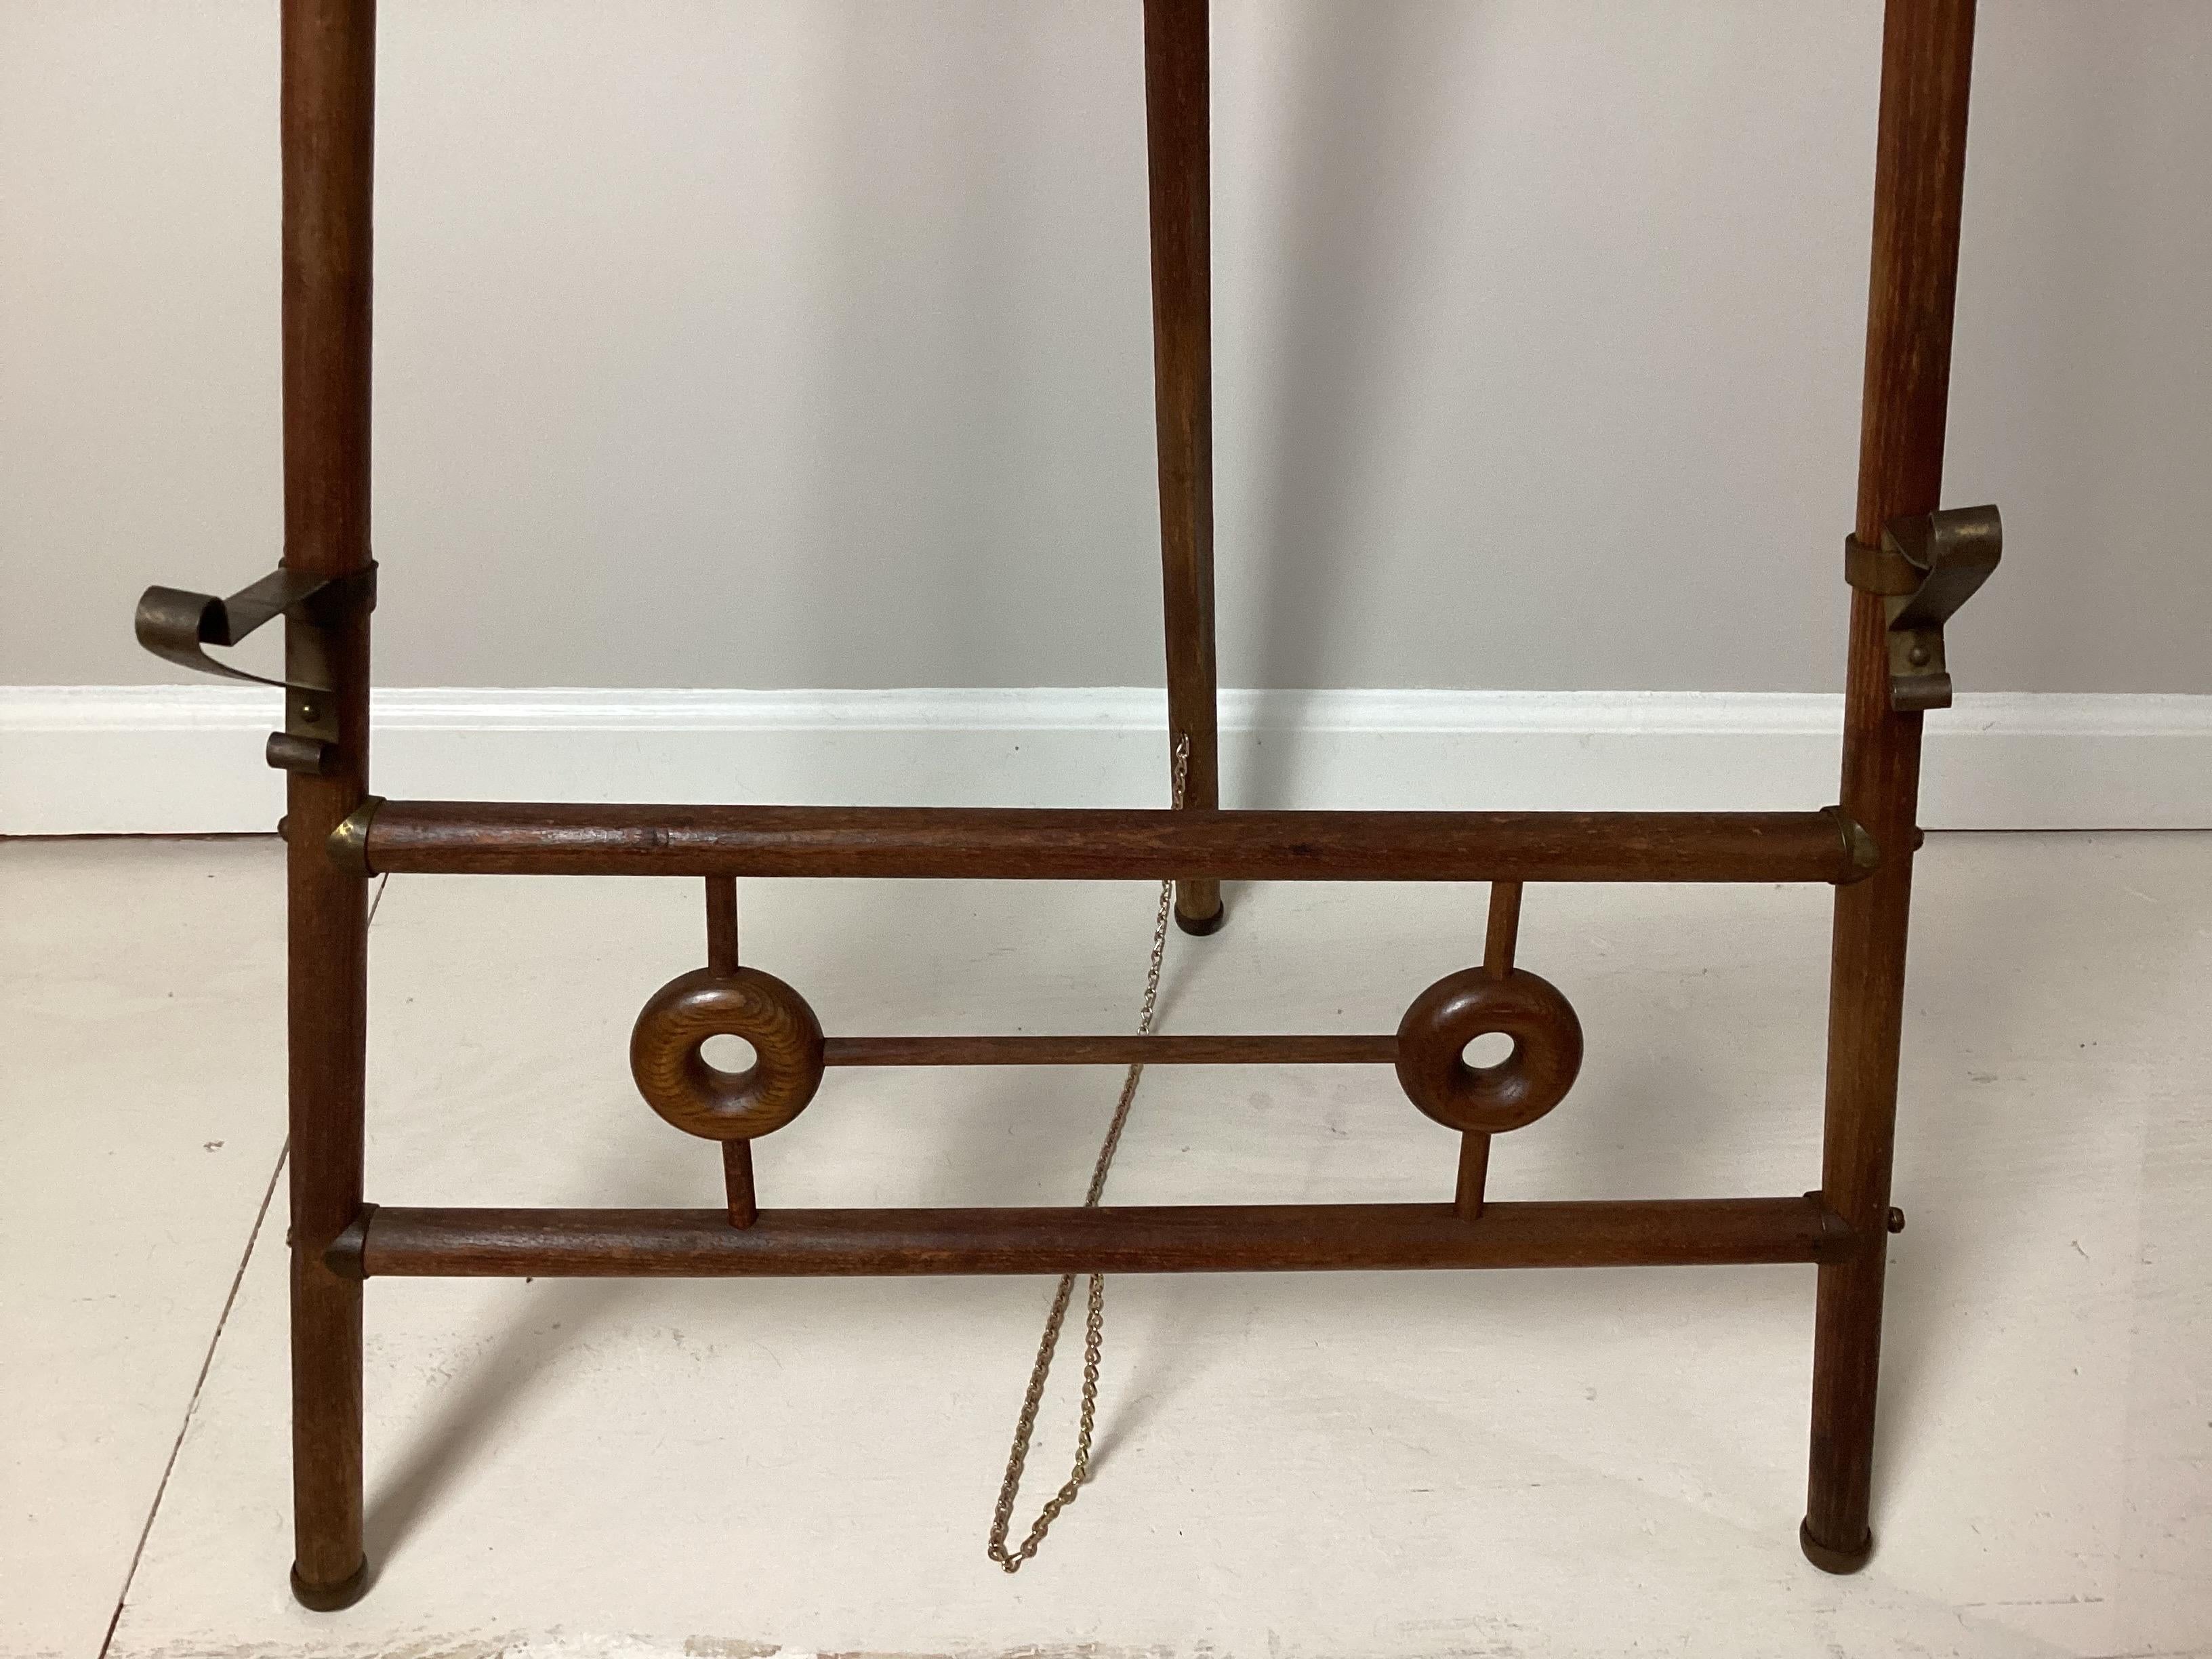 Victorian Aesthetic Movement Style Bentwood Art Easel In Good Condition For Sale In Lambertville, NJ